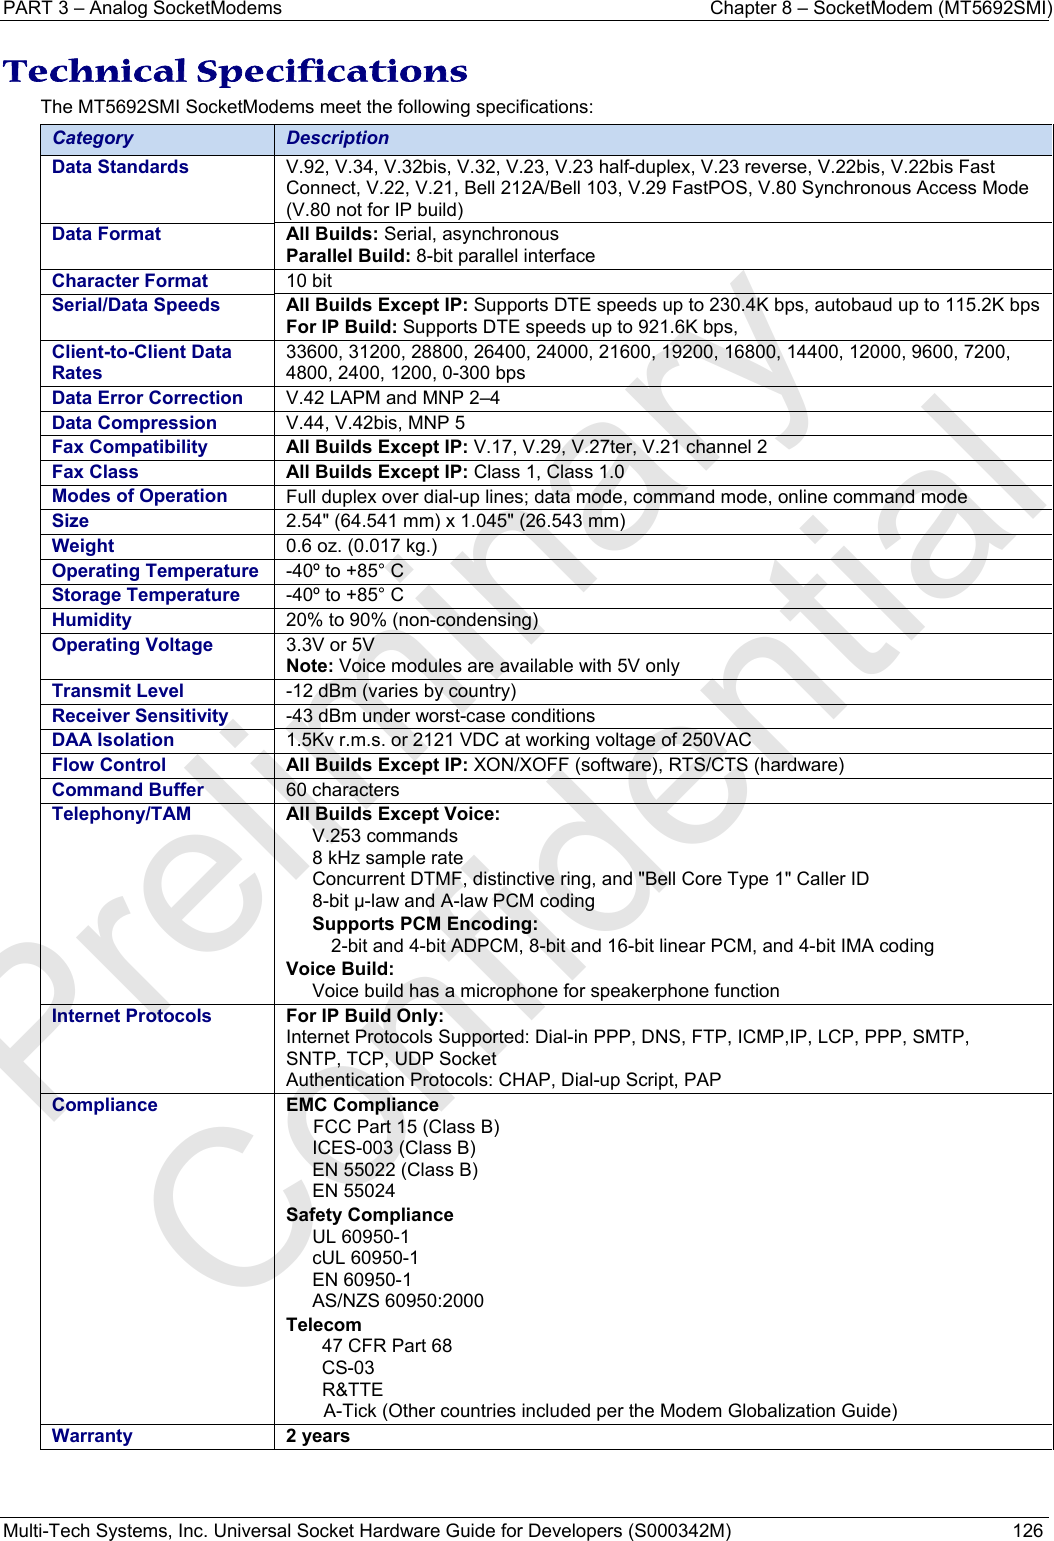 PART 3 – Analog SocketModems    Chapter 8 – SocketModem (MT5692SMI) Multi-Tech Systems, Inc. Universal Socket Hardware Guide for Developers (S000342M)  126  Technical Specifications  The MT5692SMI SocketModems meet the following specifications:  Category  Description Data Standards  V.92, V.34, V.32bis, V.32, V.23, V.23 half-duplex, V.23 reverse, V.22bis, V.22bis Fast Connect, V.22, V.21, Bell 212A/Bell 103, V.29 FastPOS, V.80 Synchronous Access Mode (V.80 not for IP build) Data Format  All Builds: Serial, asynchronous  Parallel Build: 8-bit parallel interface  Character Format  10 bit    Serial/Data Speeds   All Builds Except IP: Supports DTE speeds up to 230.4K bps, autobaud up to 115.2K bps For IP Build: Supports DTE speeds up to 921.6K bps,  Client-to-Client Data Rates 33600, 31200, 28800, 26400, 24000, 21600, 19200, 16800, 14400, 12000, 9600, 7200, 4800, 2400, 1200, 0-300 bps Data Error Correction  V.42 LAPM and MNP 2–4 Data Compression  V.44, V.42bis, MNP 5 Fax Compatibility   All Builds Except IP: V.17, V.29, V.27ter, V.21 channel 2  Fax Class  All Builds Except IP: Class 1, Class 1.0  Modes of Operation  Full duplex over dial-up lines; data mode, command mode, online command mode Size   2.54&quot; (64.541 mm) x 1.045&quot; (26.543 mm)  Weight  0.6 oz. (0.017 kg.)  Operating Temperature  -40º to +85° C   Storage Temperature  -40º to +85° C Humidity  20% to 90% (non-condensing) Operating Voltage  3.3V or 5V   Note: Voice modules are available with 5V only  Transmit Level  -12 dBm (varies by country) Receiver Sensitivity  -43 dBm under worst-case conditions DAA Isolation  1.5Kv r.m.s. or 2121 VDC at working voltage of 250VAC Flow Control  All Builds Except IP: XON/XOFF (software), RTS/CTS (hardware)  Command Buffer 60 characters  Telephony/TAM  All Builds Except Voice:V.253 commands 8 kHz sample rate Concurrent DTMF, distinctive ring, and &quot;Bell Core Type 1&quot; Caller ID 8-bit μ-law and A-law PCM coding Supports PCM Encoding: 2-bit and 4-bit ADPCM, 8-bit and 16-bit linear PCM, and 4-bit IMA coding Voice Build: Voice build has a microphone for speakerphone function Internet Protocols  For IP Build Only:Internet Protocols Supported: Dial-in PPP, DNS, FTP, ICMP,IP, LCP, PPP, SMTP, SNTP, TCP, UDP Socket Authentication Protocols: CHAP, Dial-up Script, PAP Compliance  EMC ComplianceFCC Part 15 (Class B) ICES-003 (Class B) EN 55022 (Class B) EN 55024 Safety Compliance UL 60950-1 cUL 60950-1 EN 60950-1 AS/NZS 60950:2000 Telecom  47 CFR Part 68 CS-03 R&amp;TTE   A-Tick (Other countries included per the Modem Globalization Guide) Warranty  2 years   Preliminary  Confidential